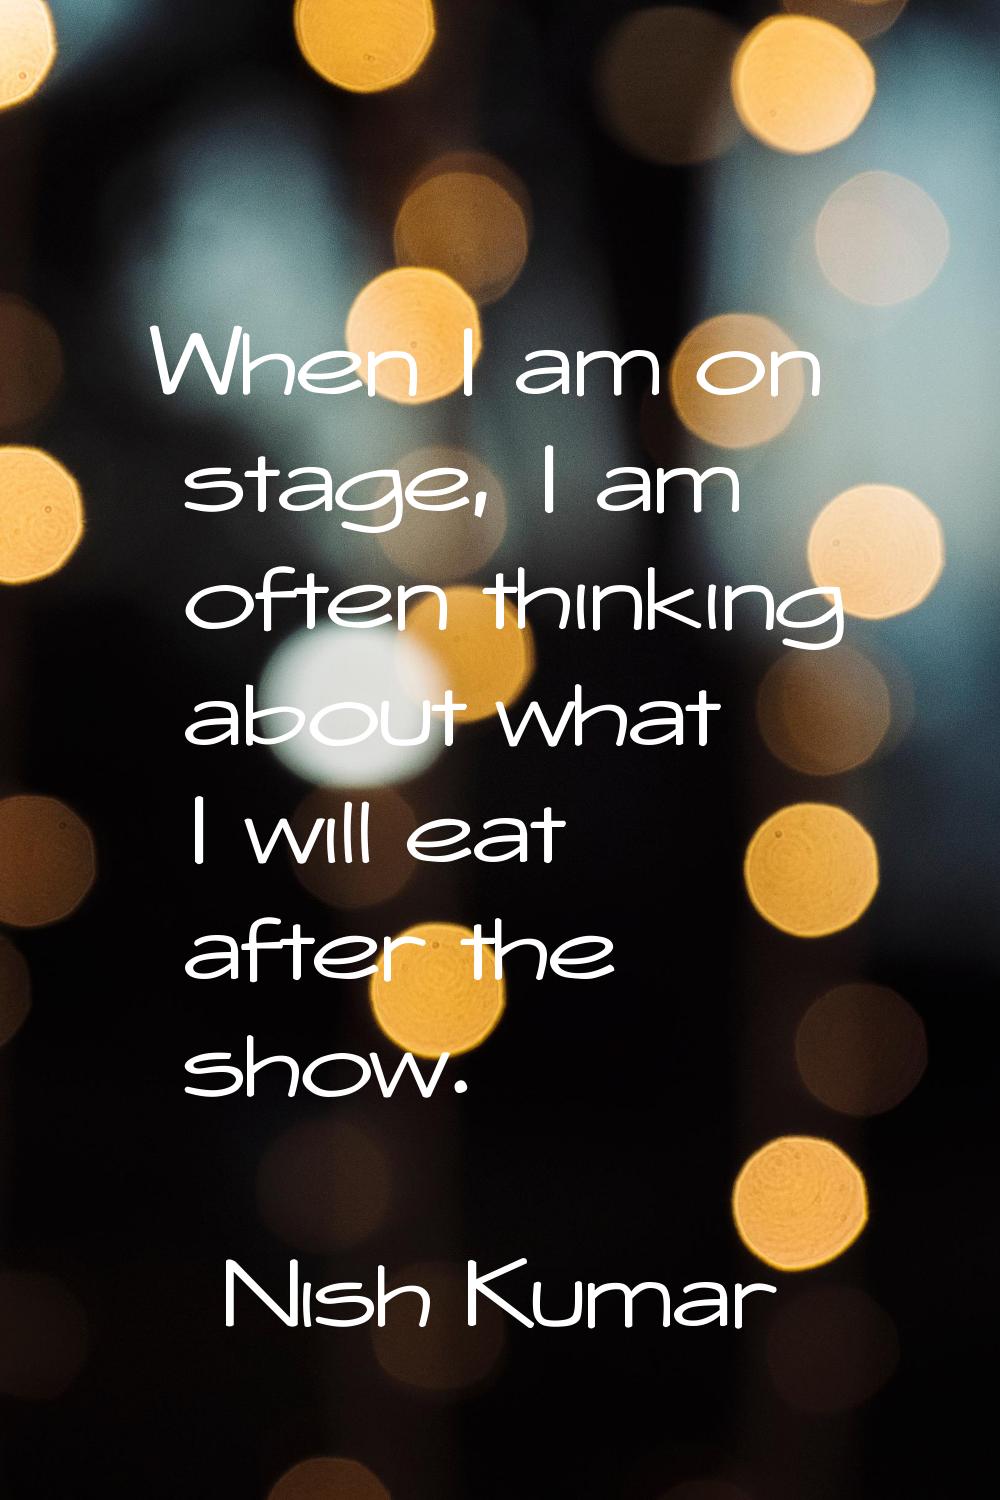 When I am on stage, I am often thinking about what I will eat after the show.